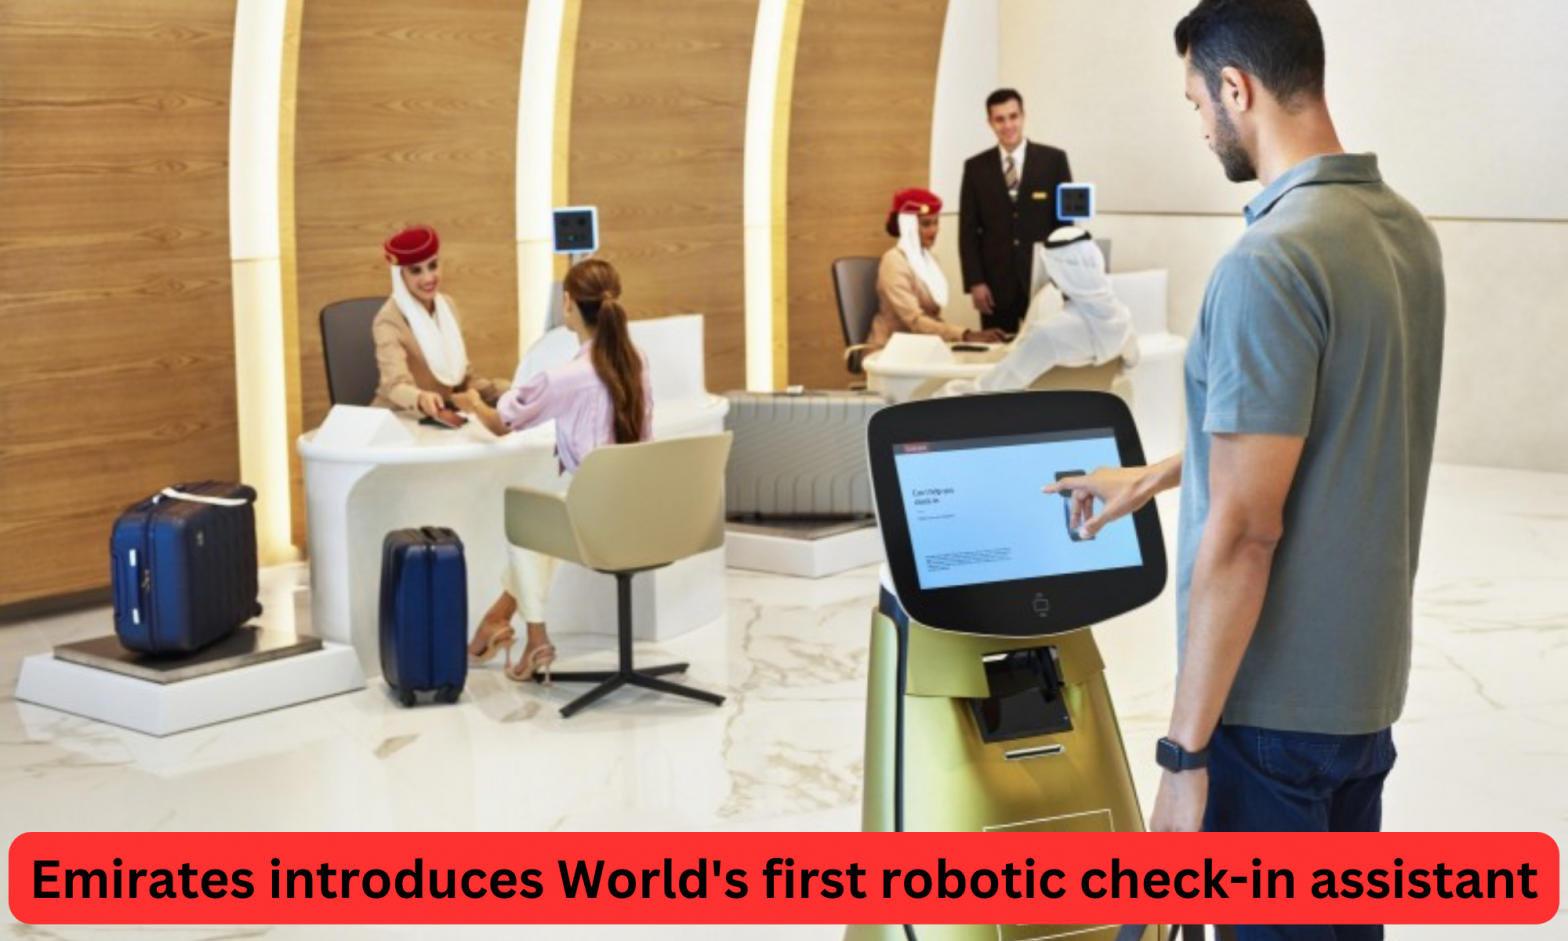 Emirates introduces World's first robotic check-in assistant